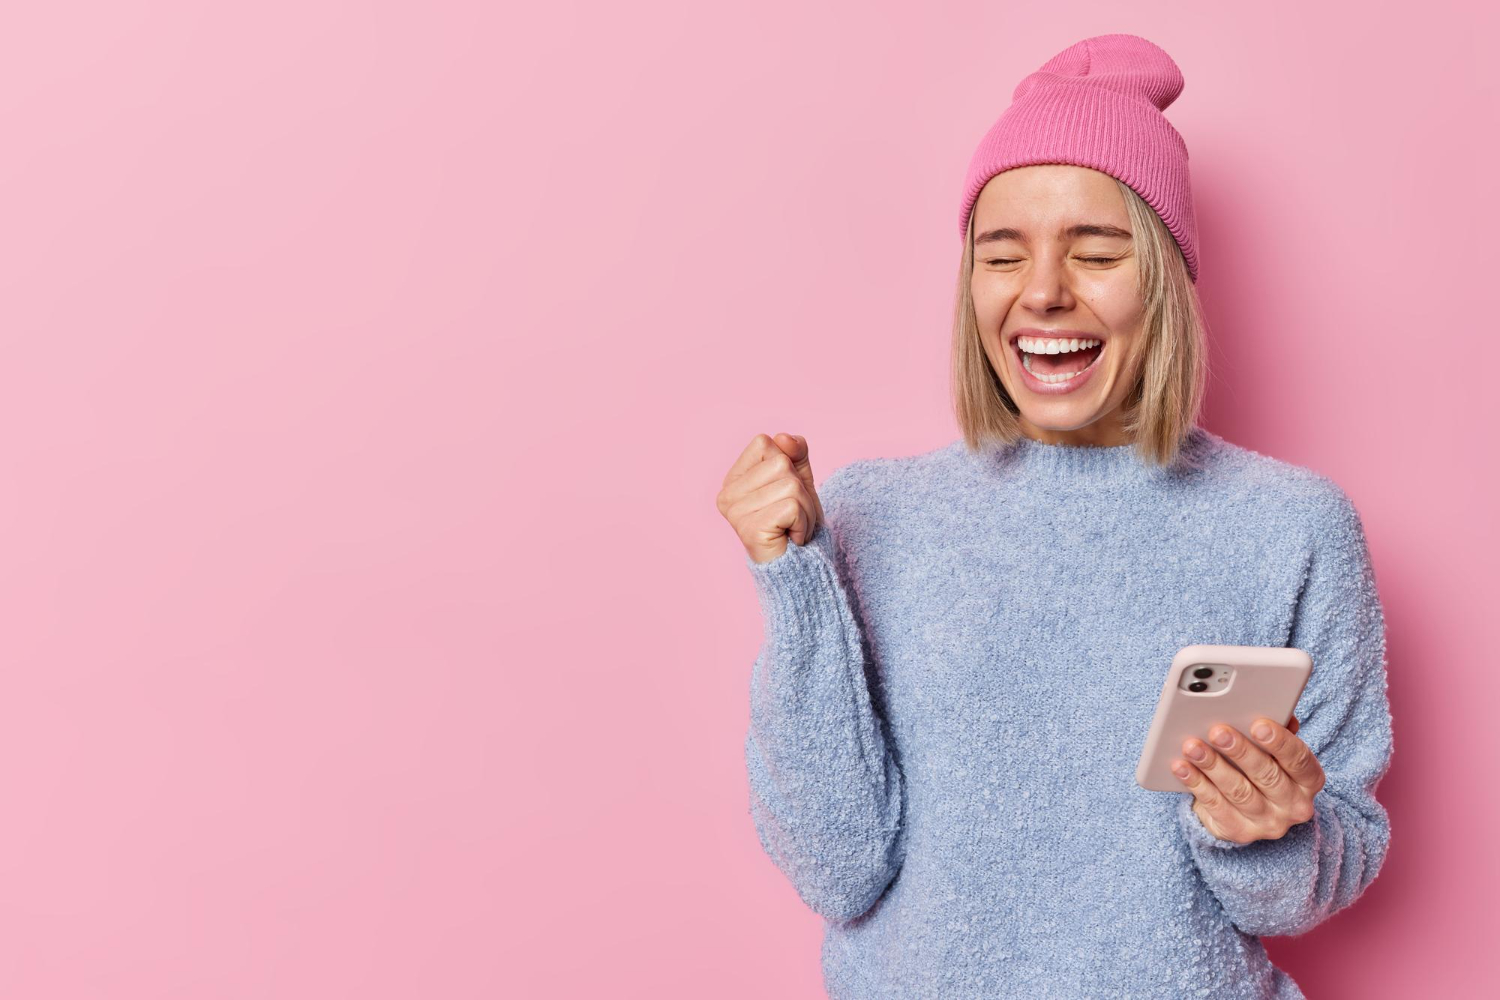 A joyful positive blond woman holding a phone in her hand.